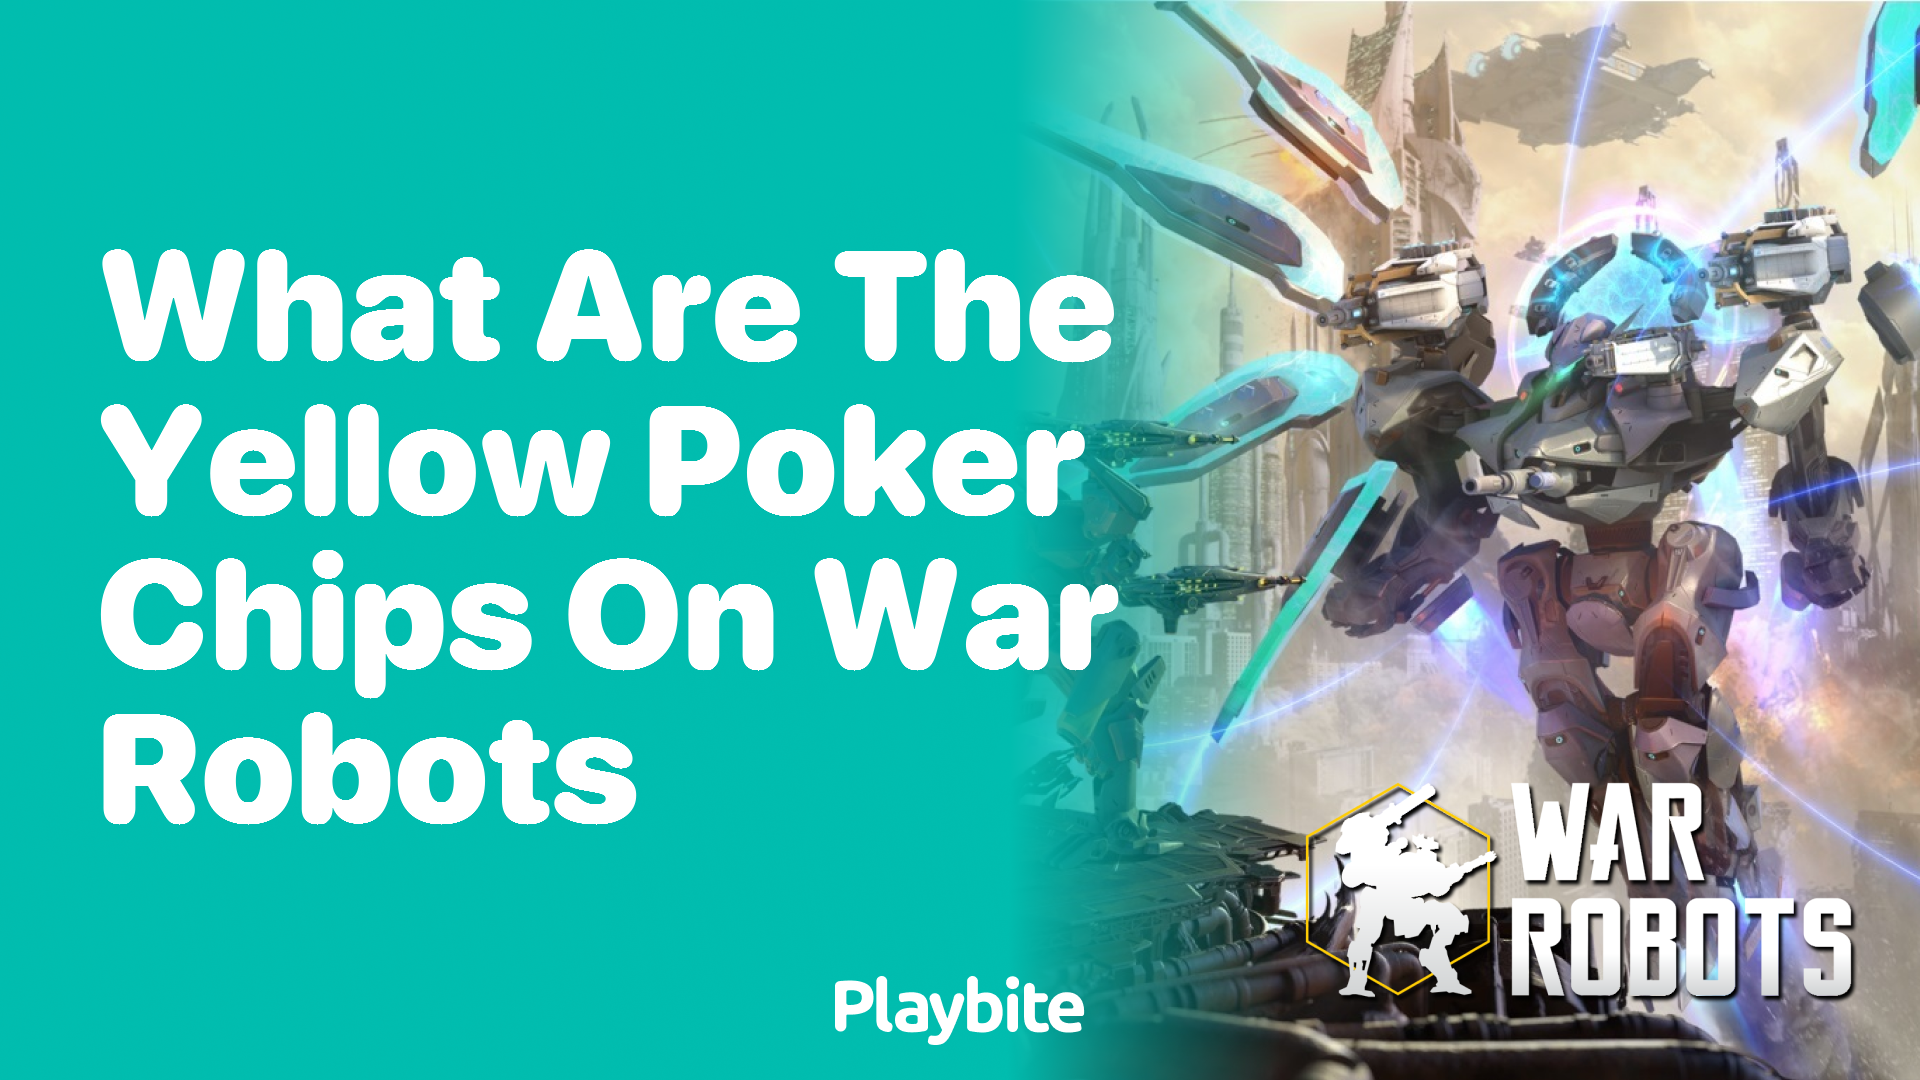 What Are the Yellow Poker Chips on War Robots?